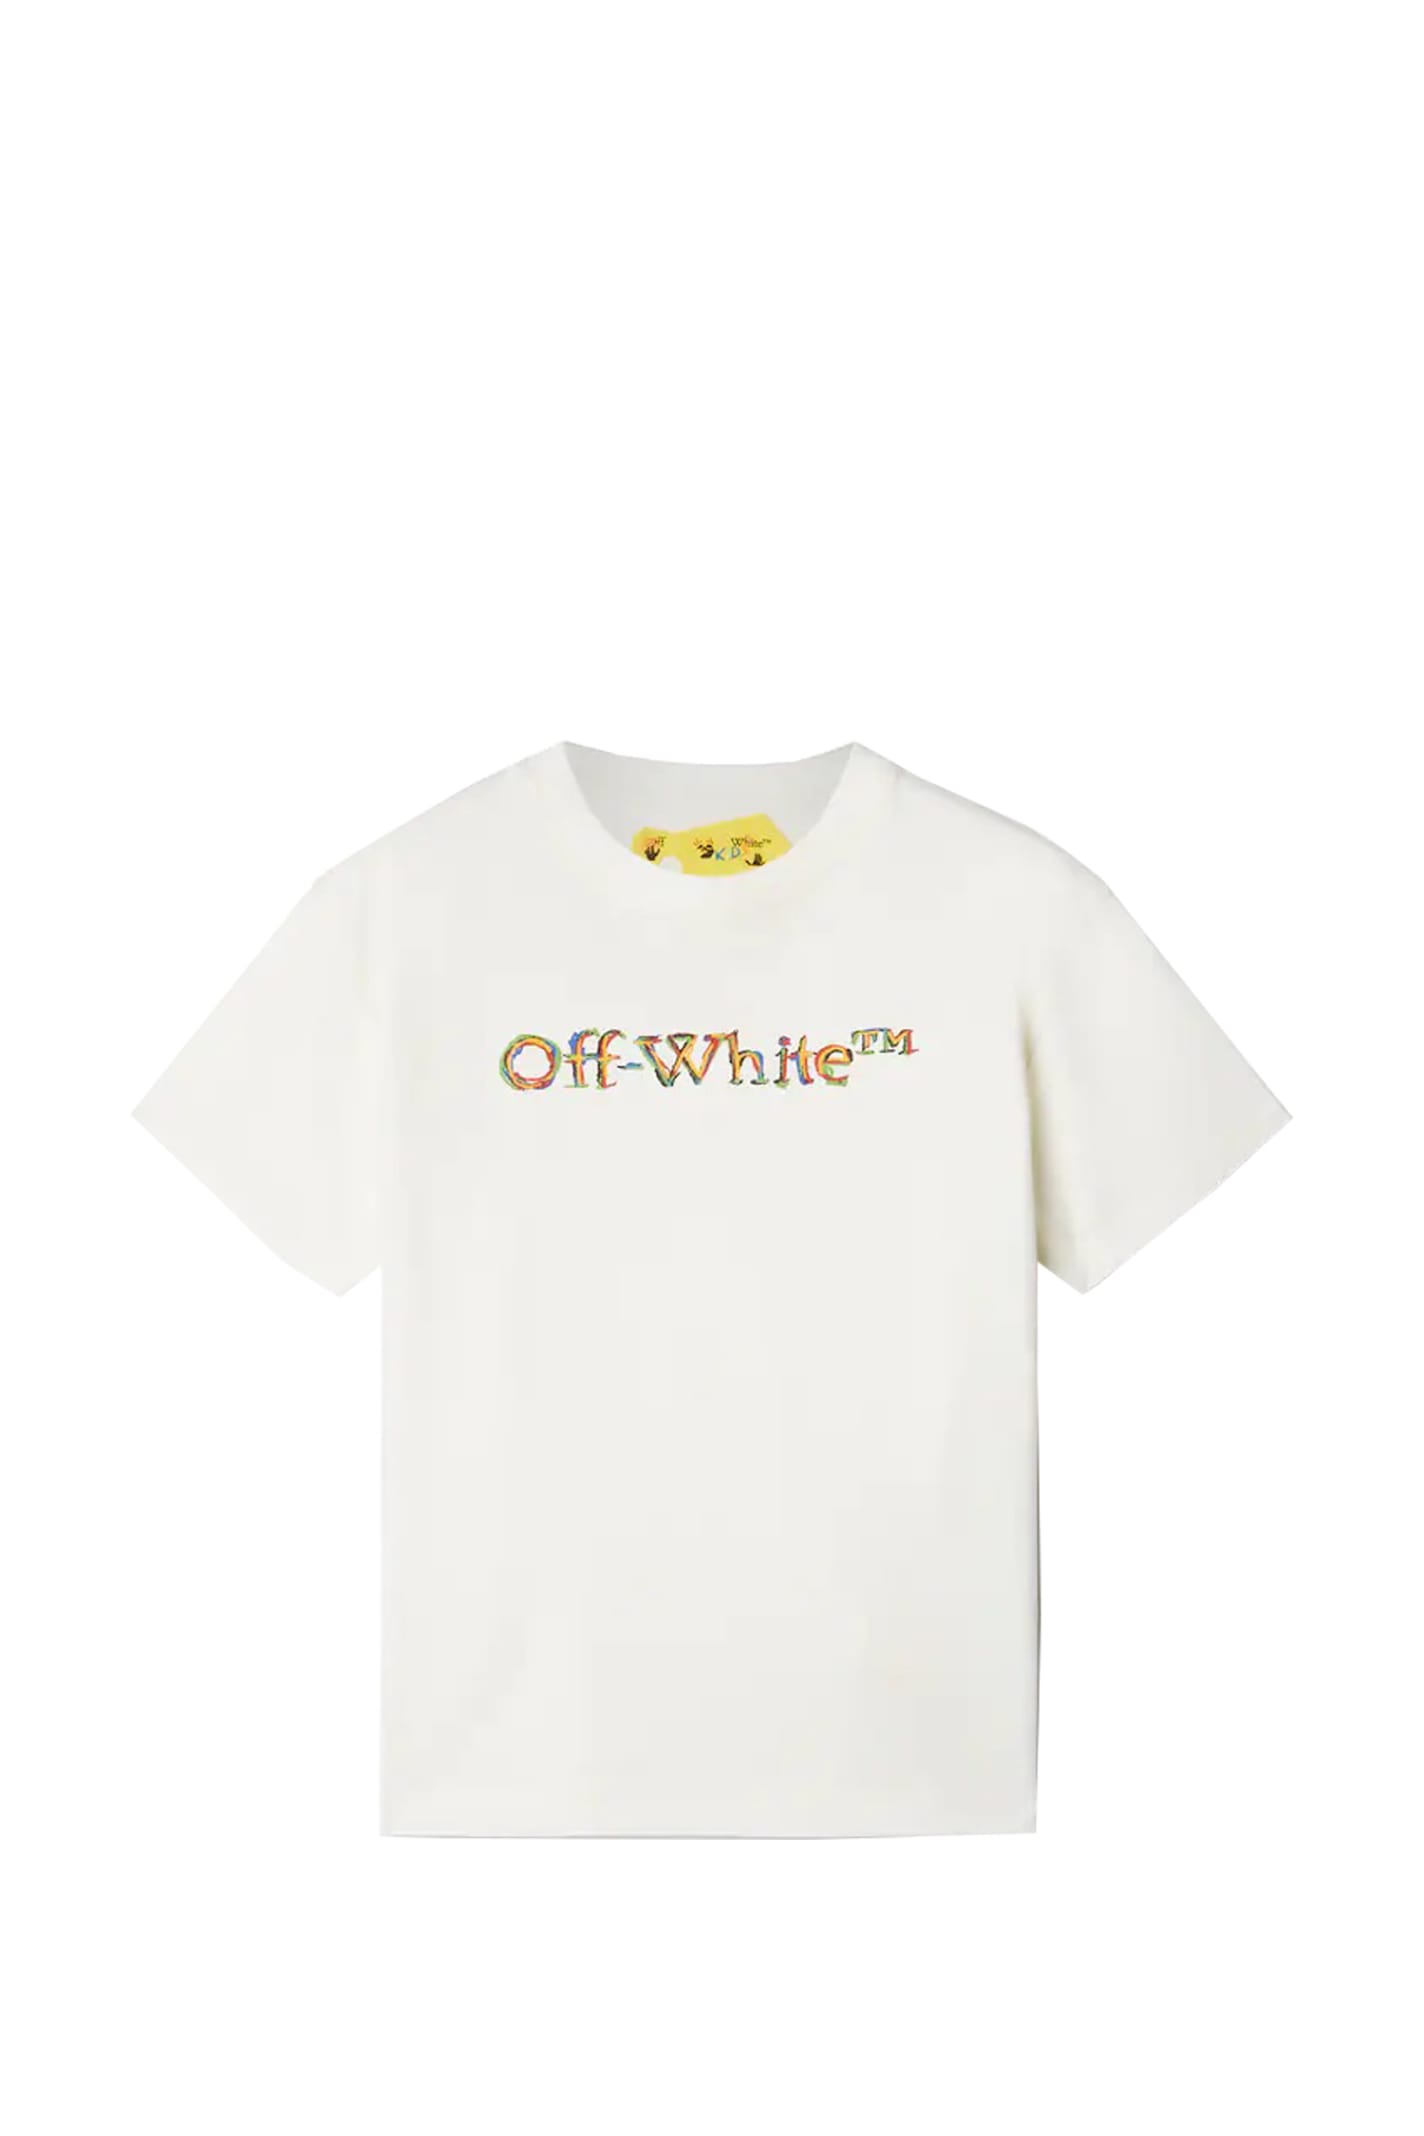 OFF-WHITE T-SHIRT WITH SKETCH LOGO